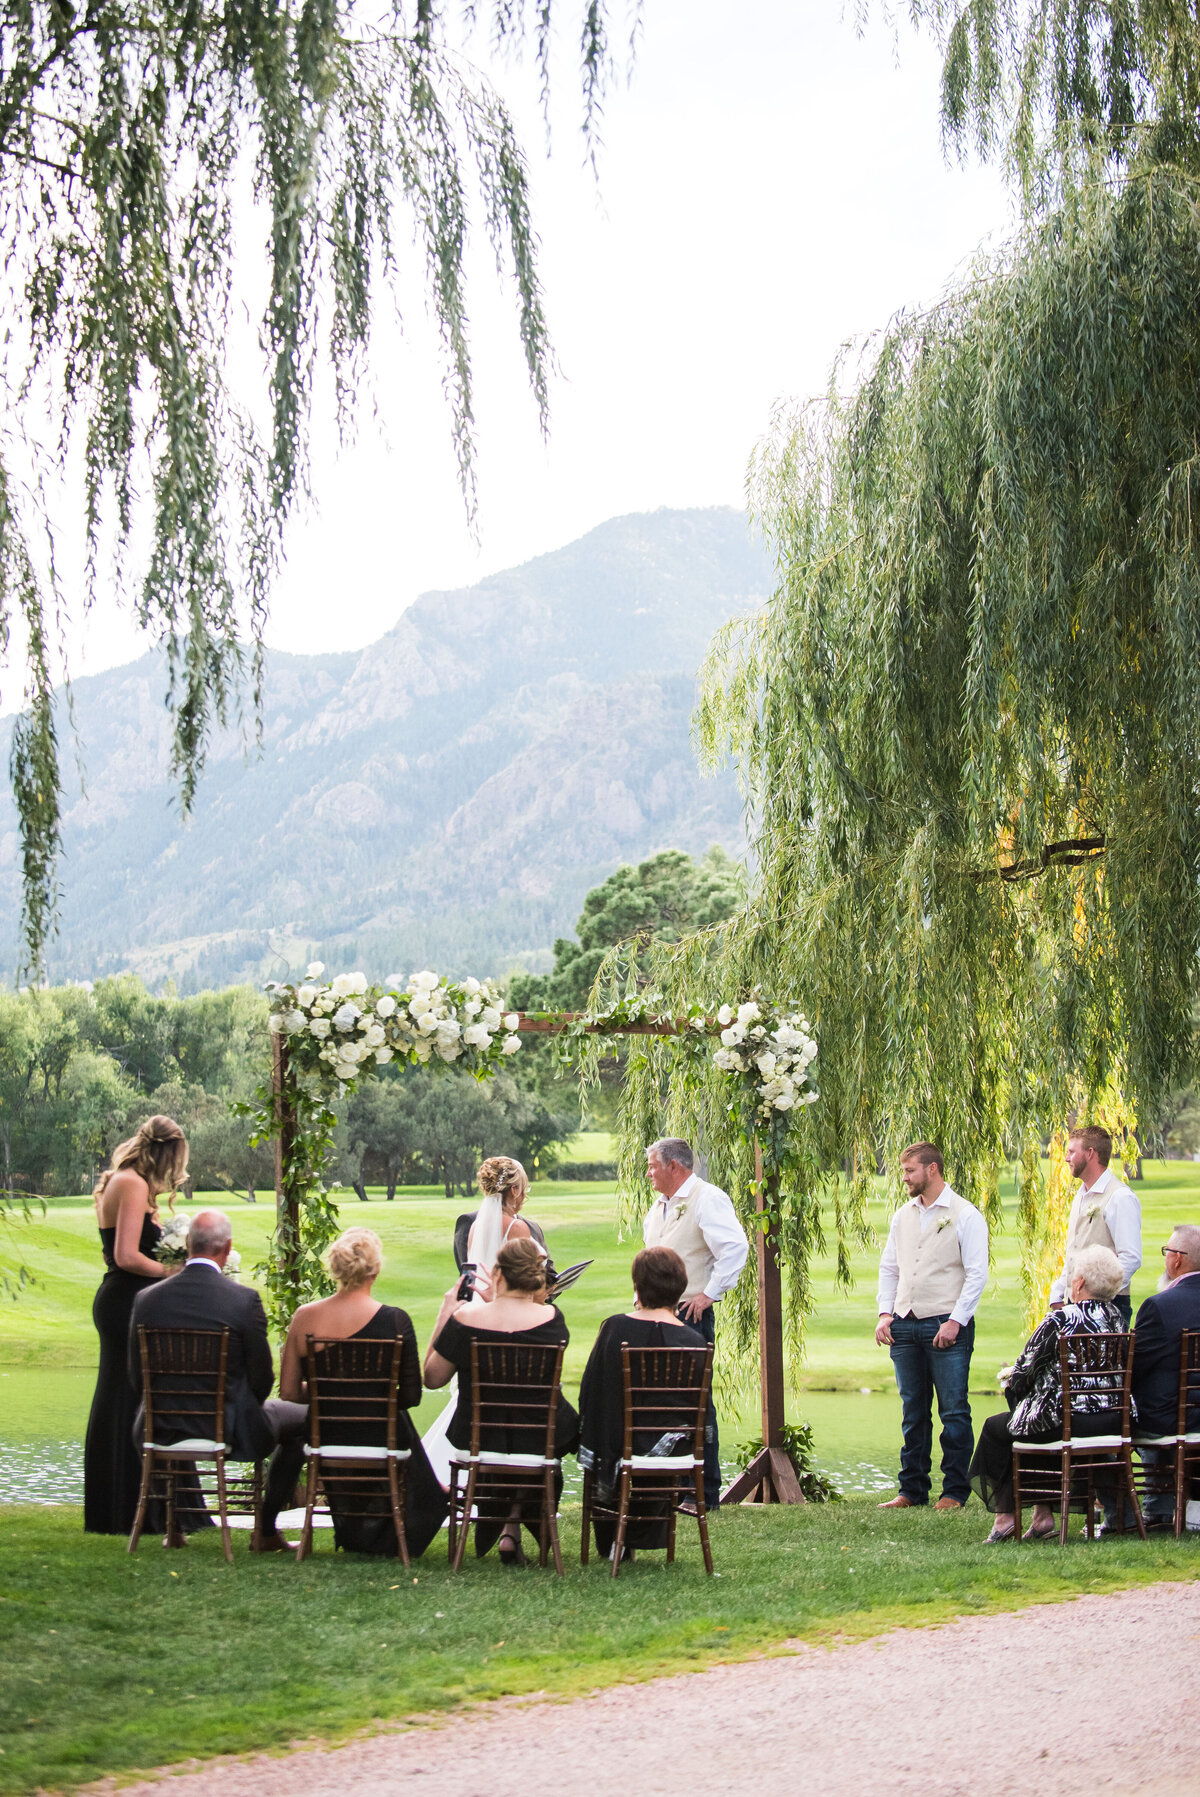 A wide angle shot of a ceremony under a floral wedding arch next to a weeping willow